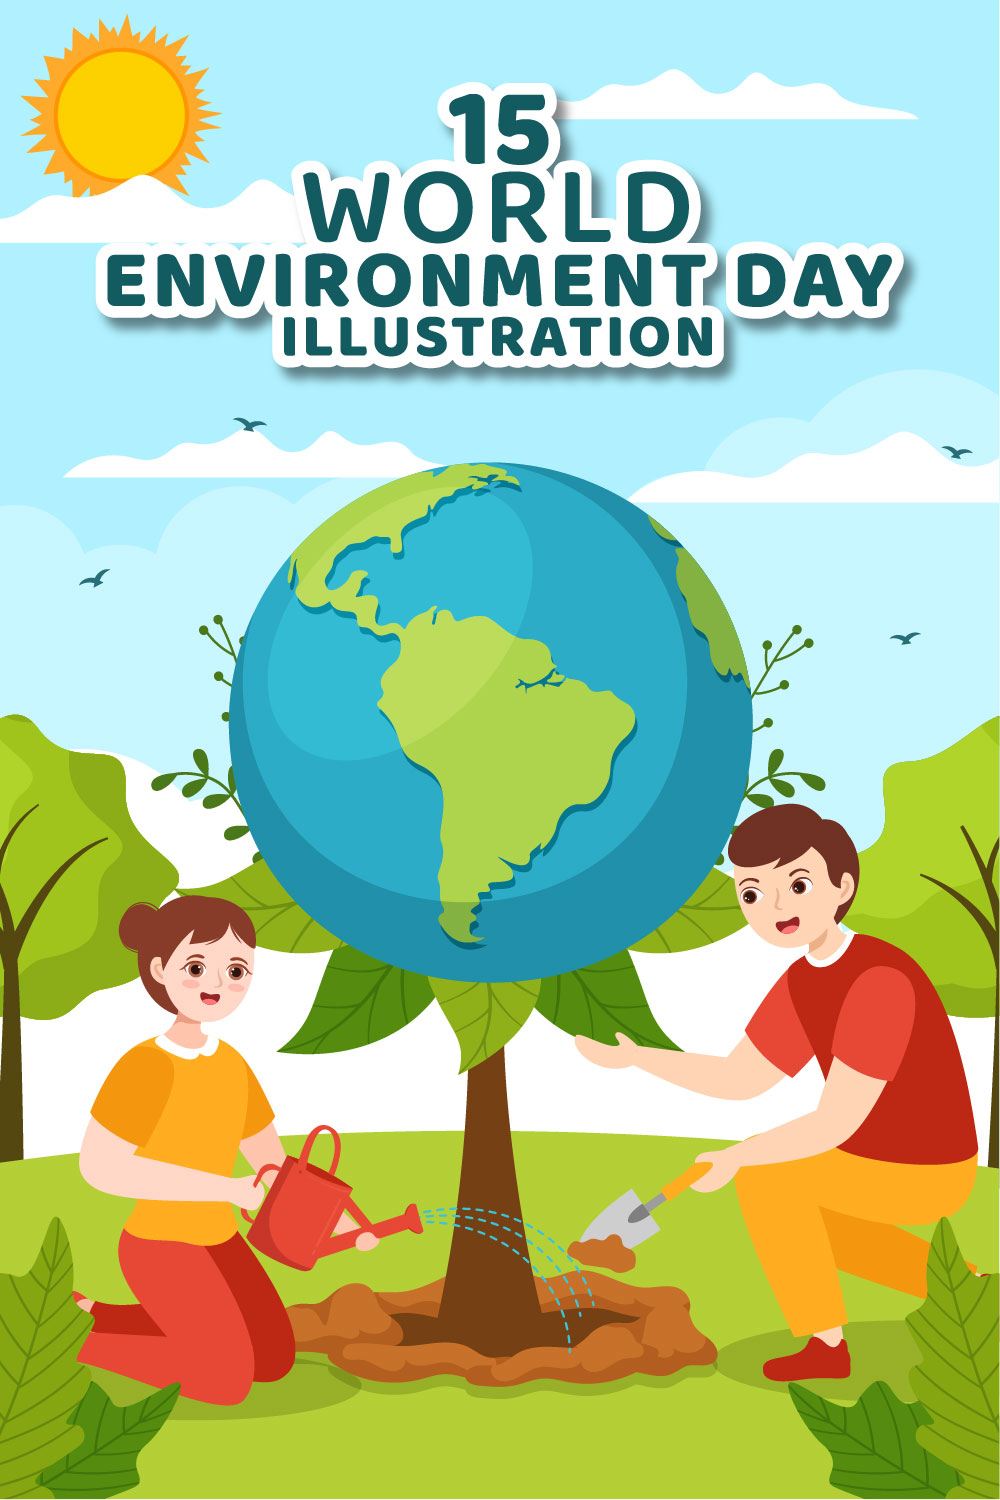 15 World Environment Day Illustration pinterest preview image.